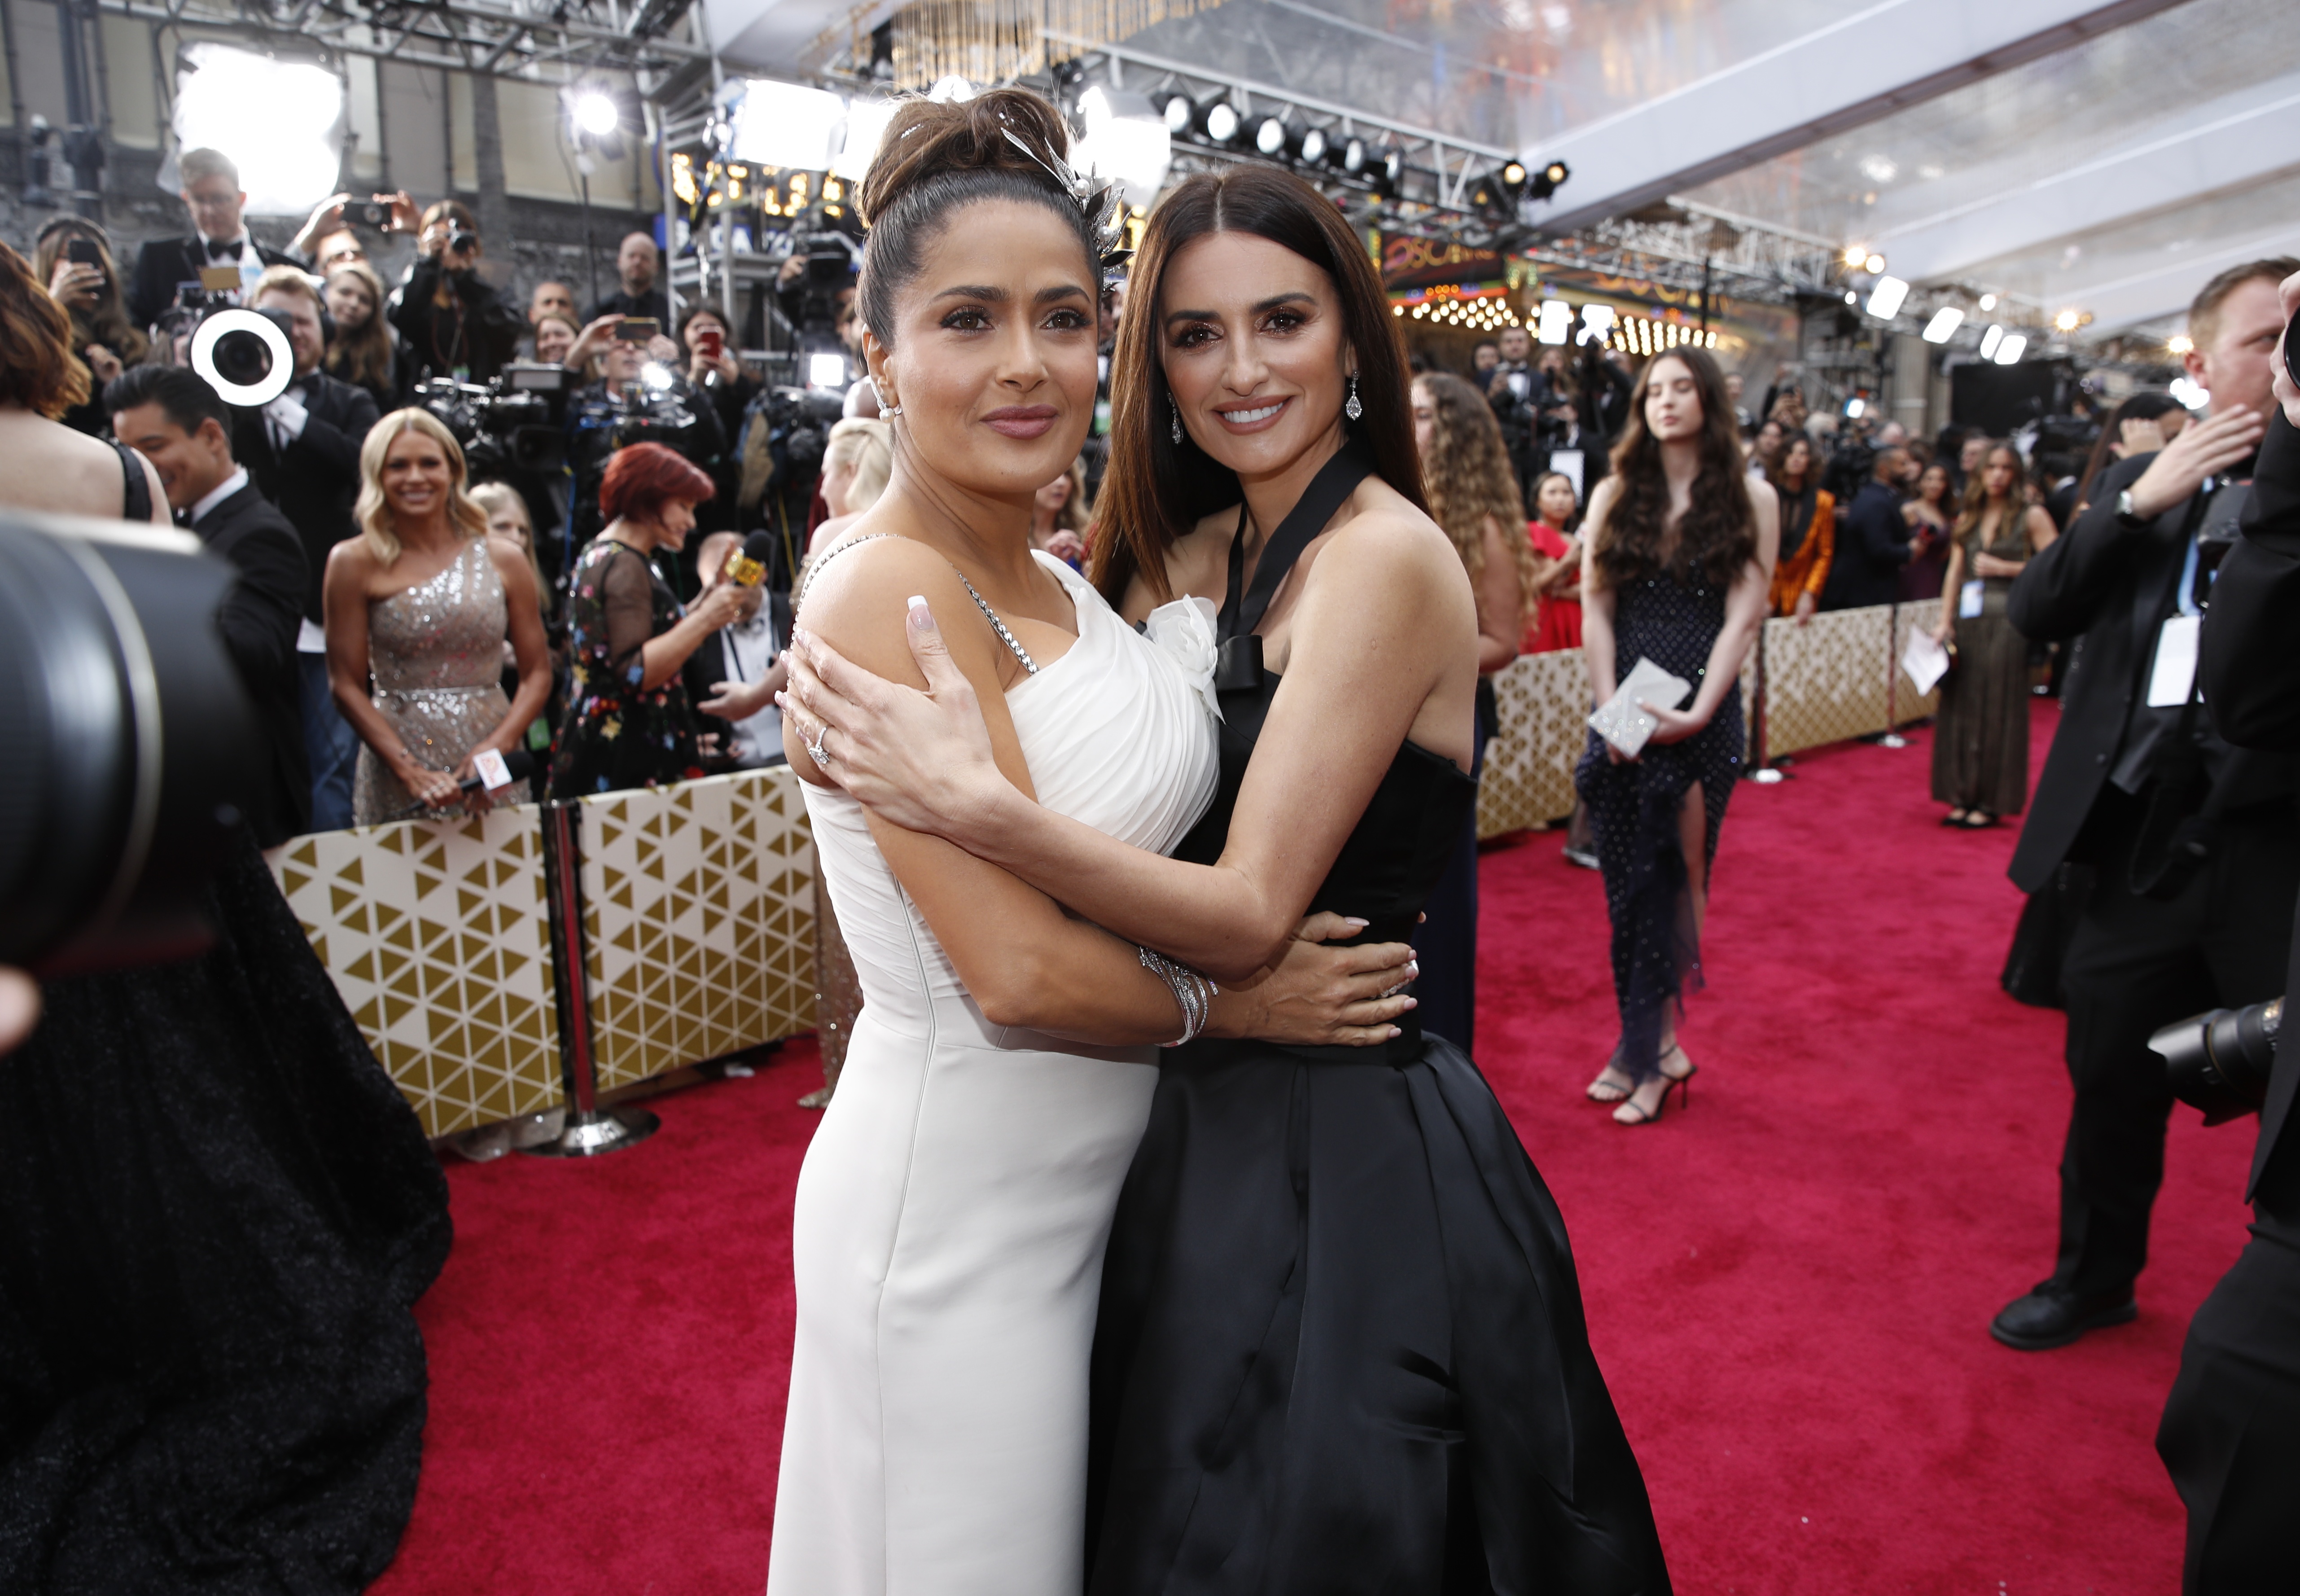 Salma Hayek and Penélope Cruz during the red carpet of the Academy Awards that took place in February 2020 in Los Angeles, California, (Photo: REUTERS / Mike Blake)